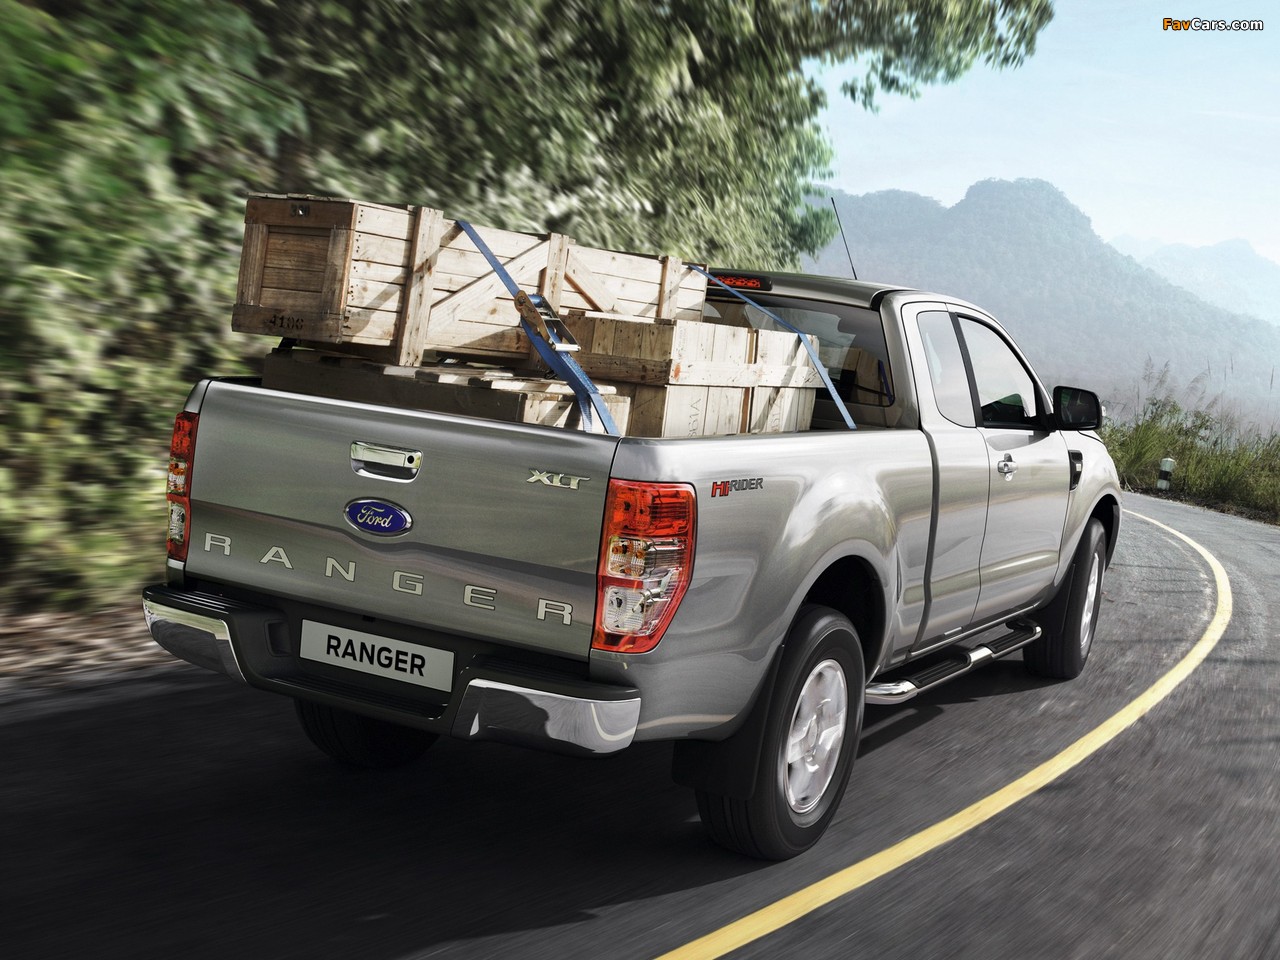 Ford Ranger Extended Cab XLT 2011 pictures (1280 x 960)